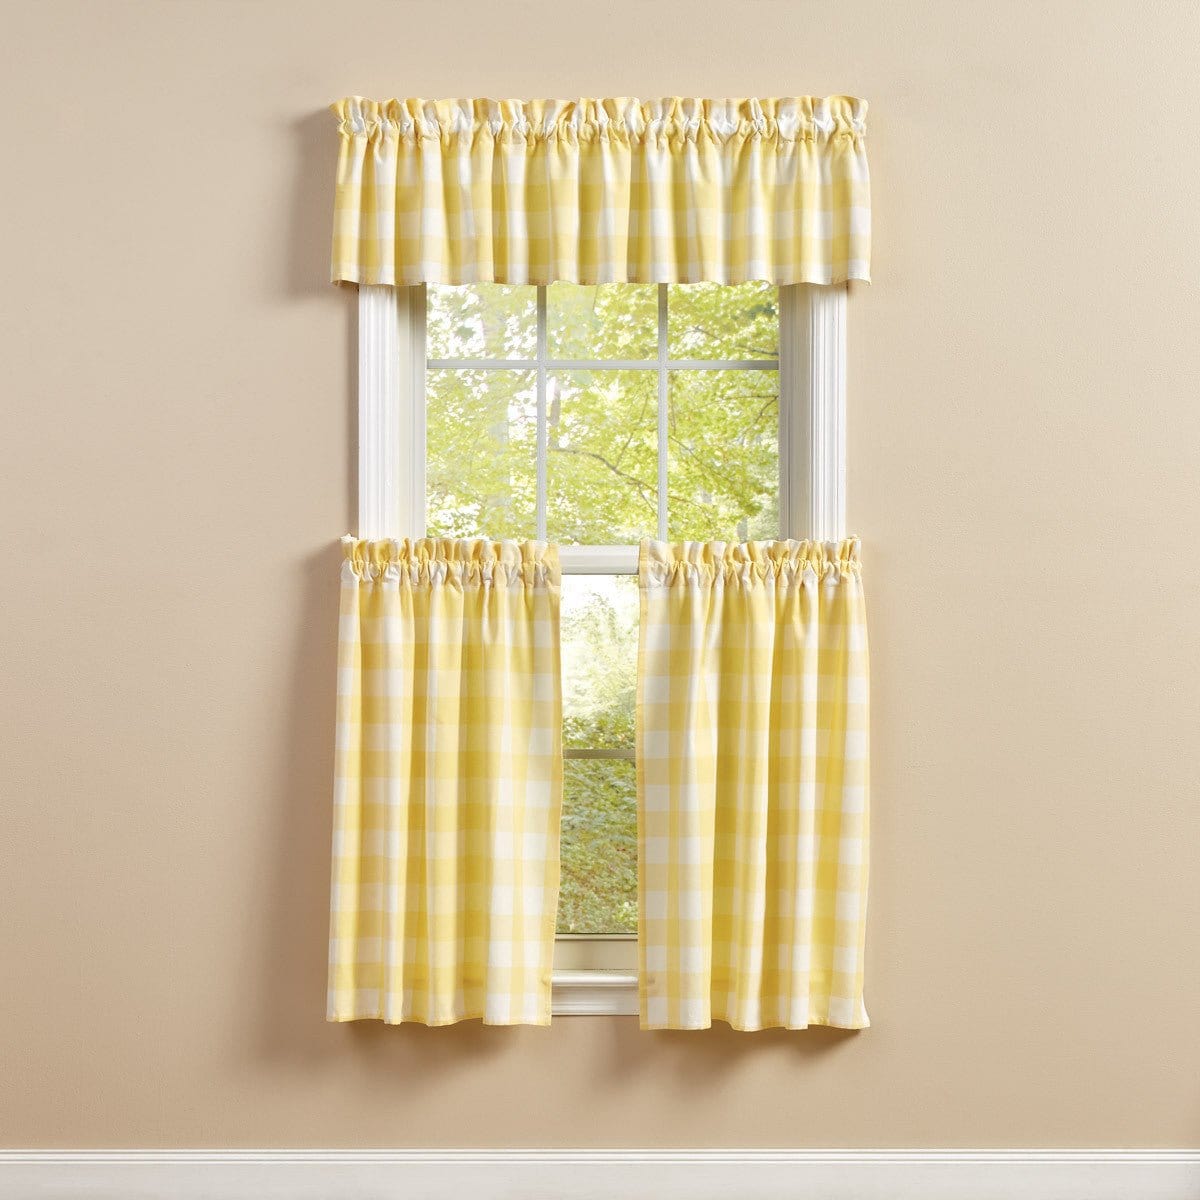 Wicklow Check in Yellow Valance Unlined-Park Designs-The Village Merchant